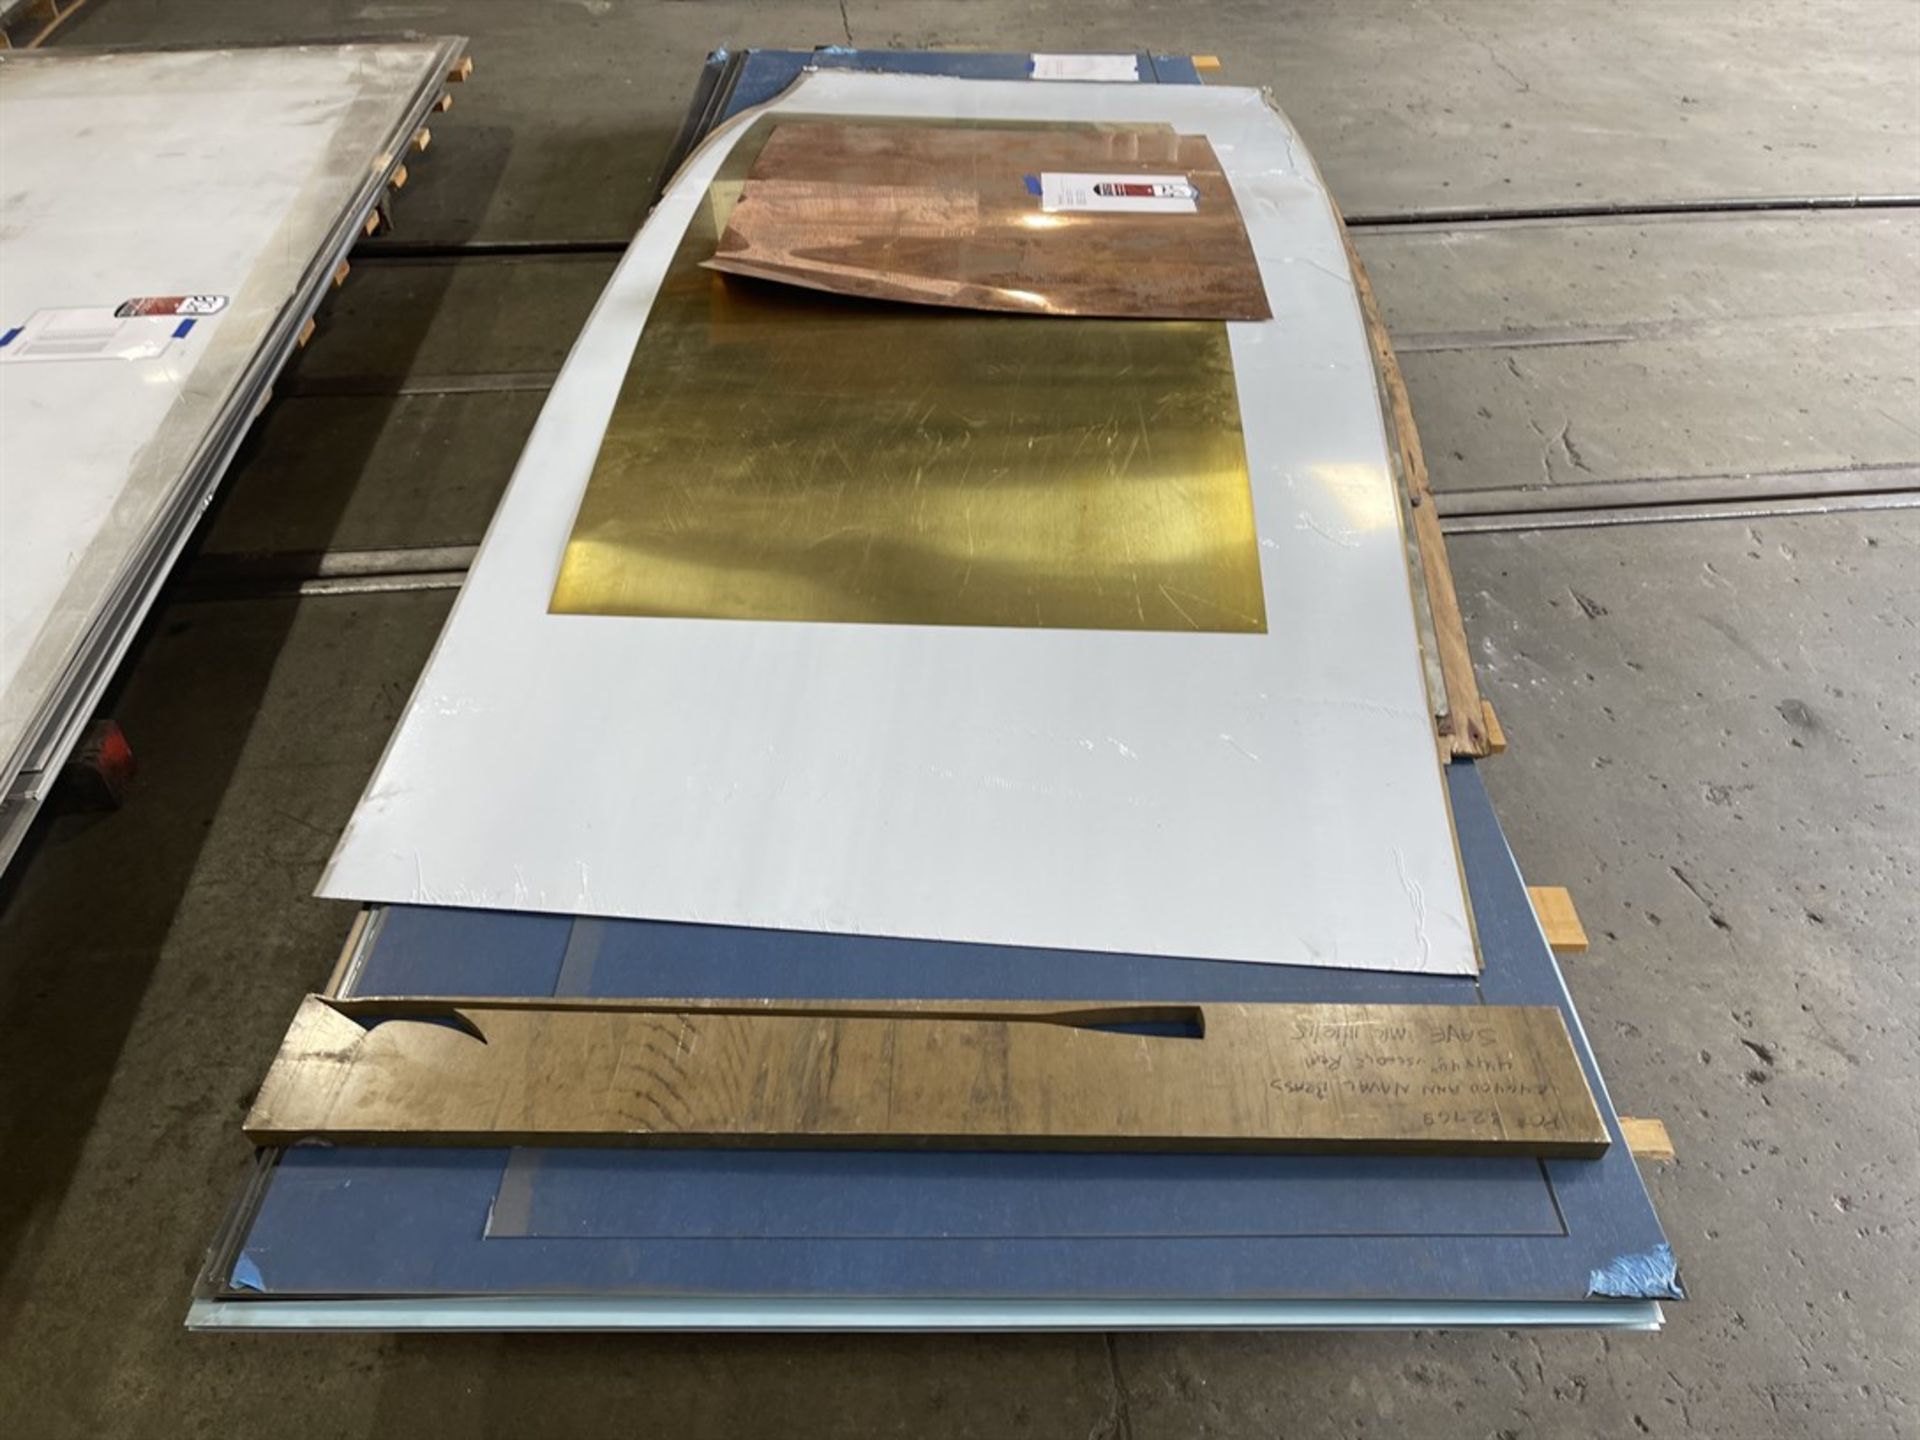 Lot of Assorted Sheet Stock Including Bronze and Clear Anodized 5052 Aluminum Sheet, Copper and - Image 3 of 5